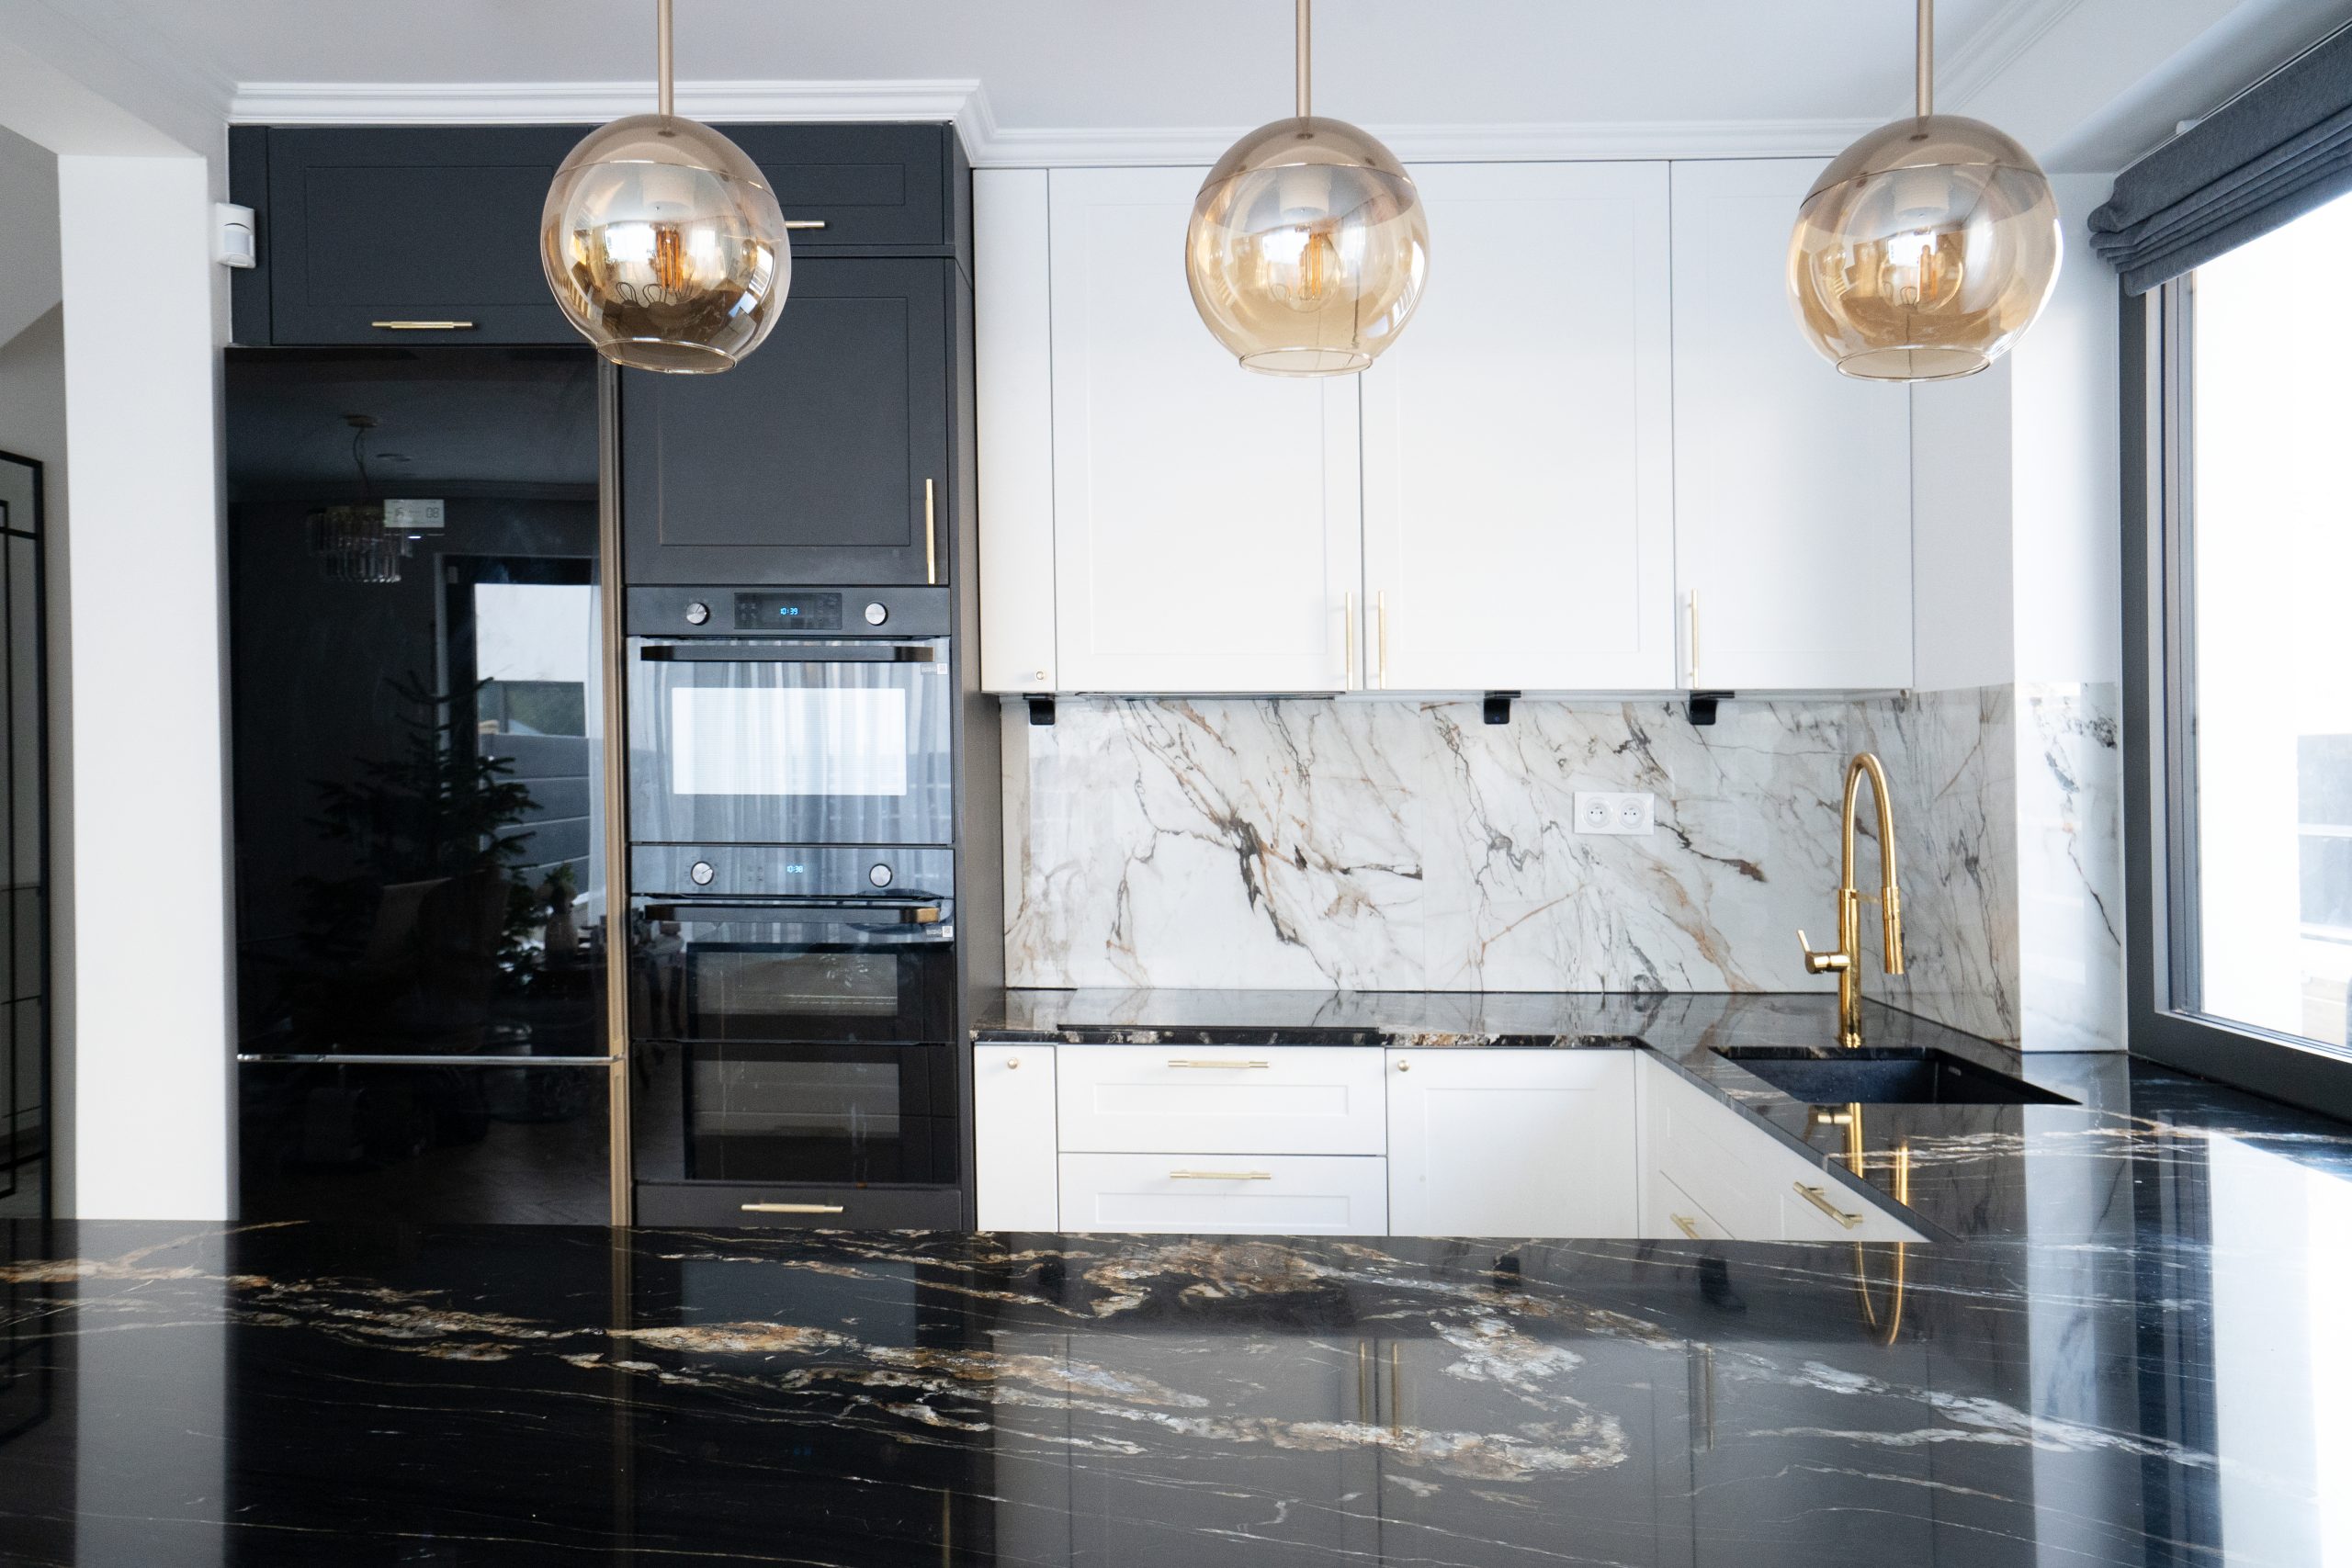 A modern kitchen with marble countertops and pendant lights